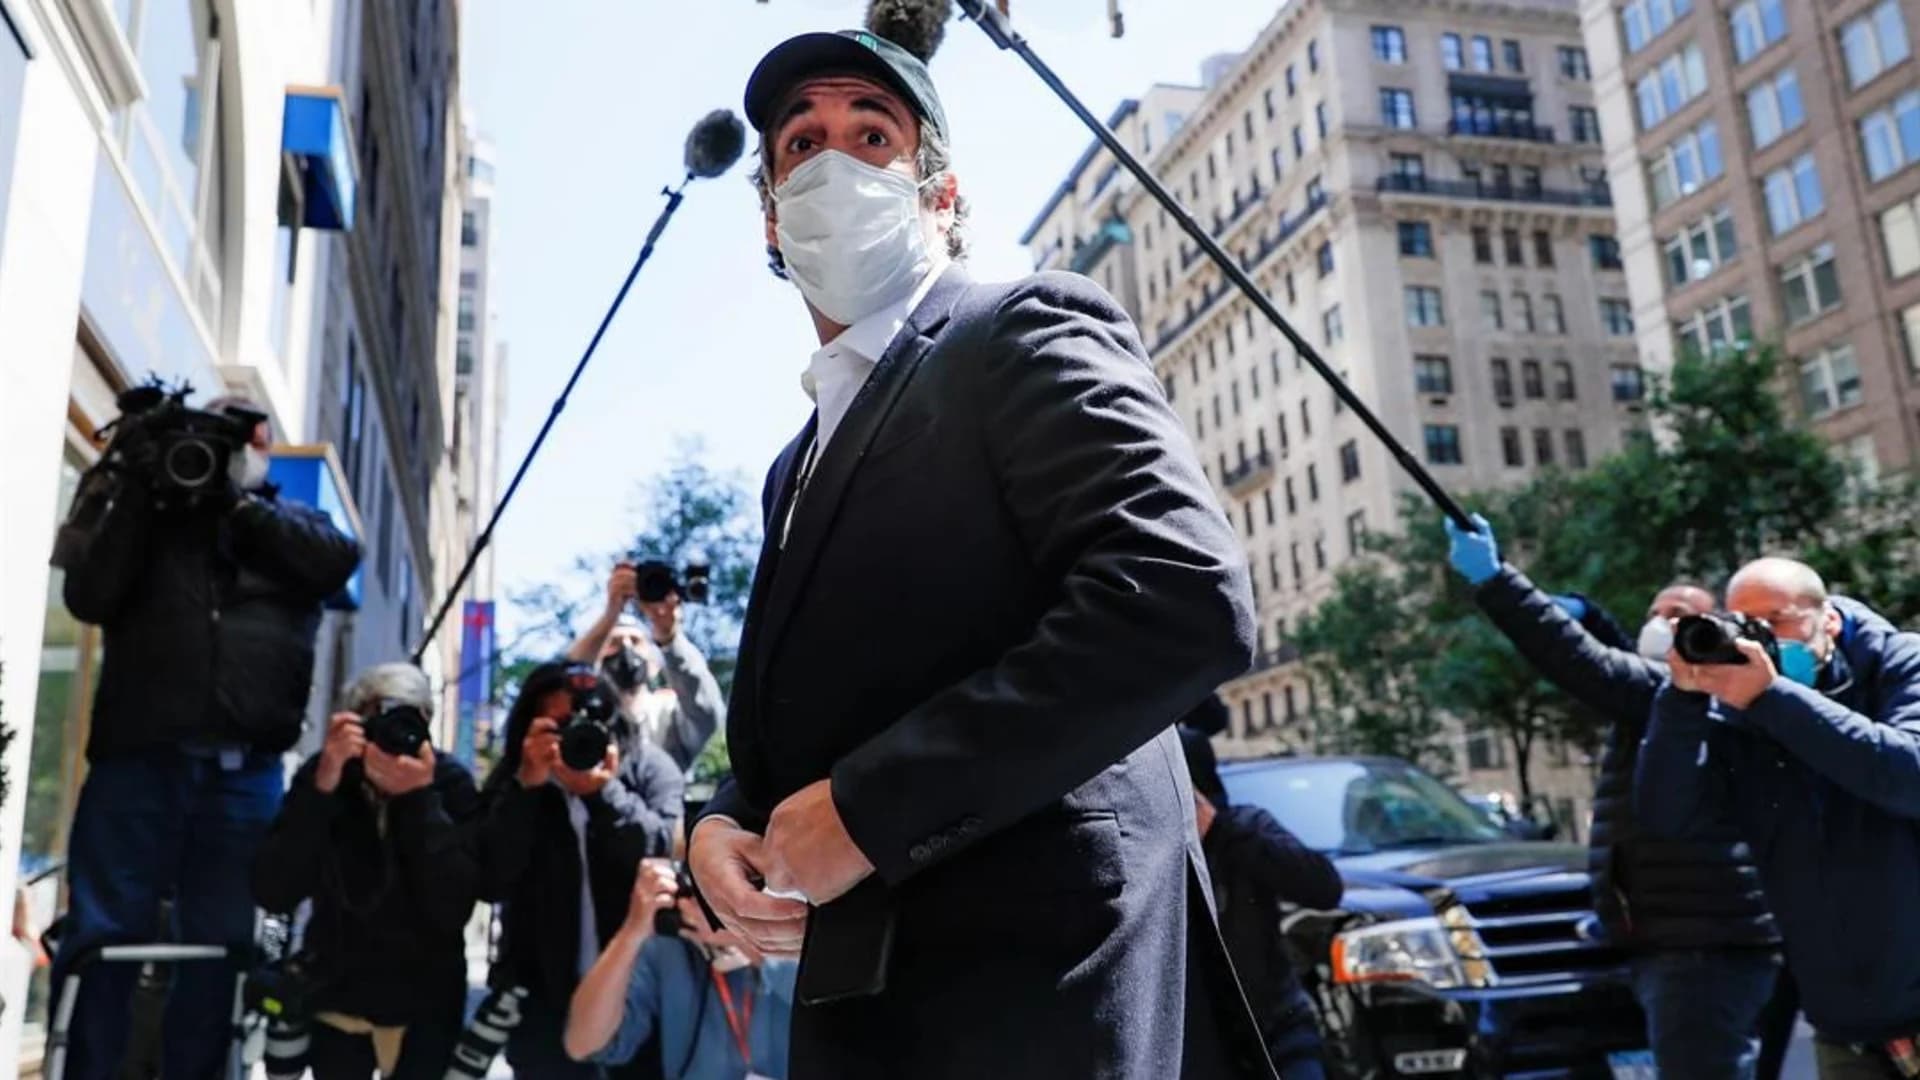 Judge orders Michael Cohen to be released from prison